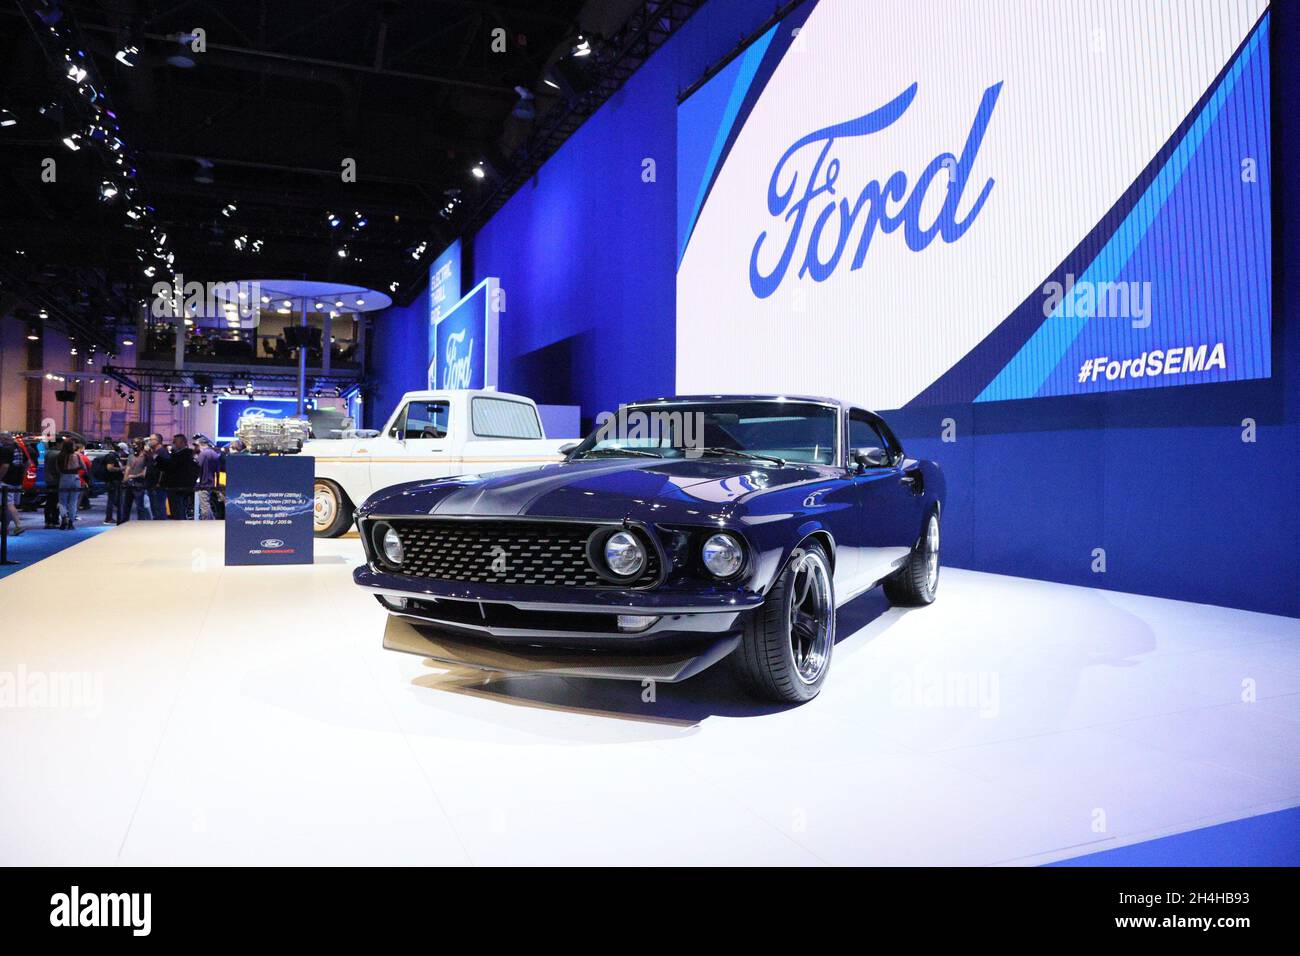 Las Vegas, NV, USA. 2nd Nov, 2021. Keith Urban's restored 1969 Ford Mustang Fastback at a public appearance for SEMA Show 2021 - TUE, Las Vegas Convention Center, Las Vegas, NV November 2, 2021. Credit: JA/Everett Collection/Alamy Live News Stock Photo